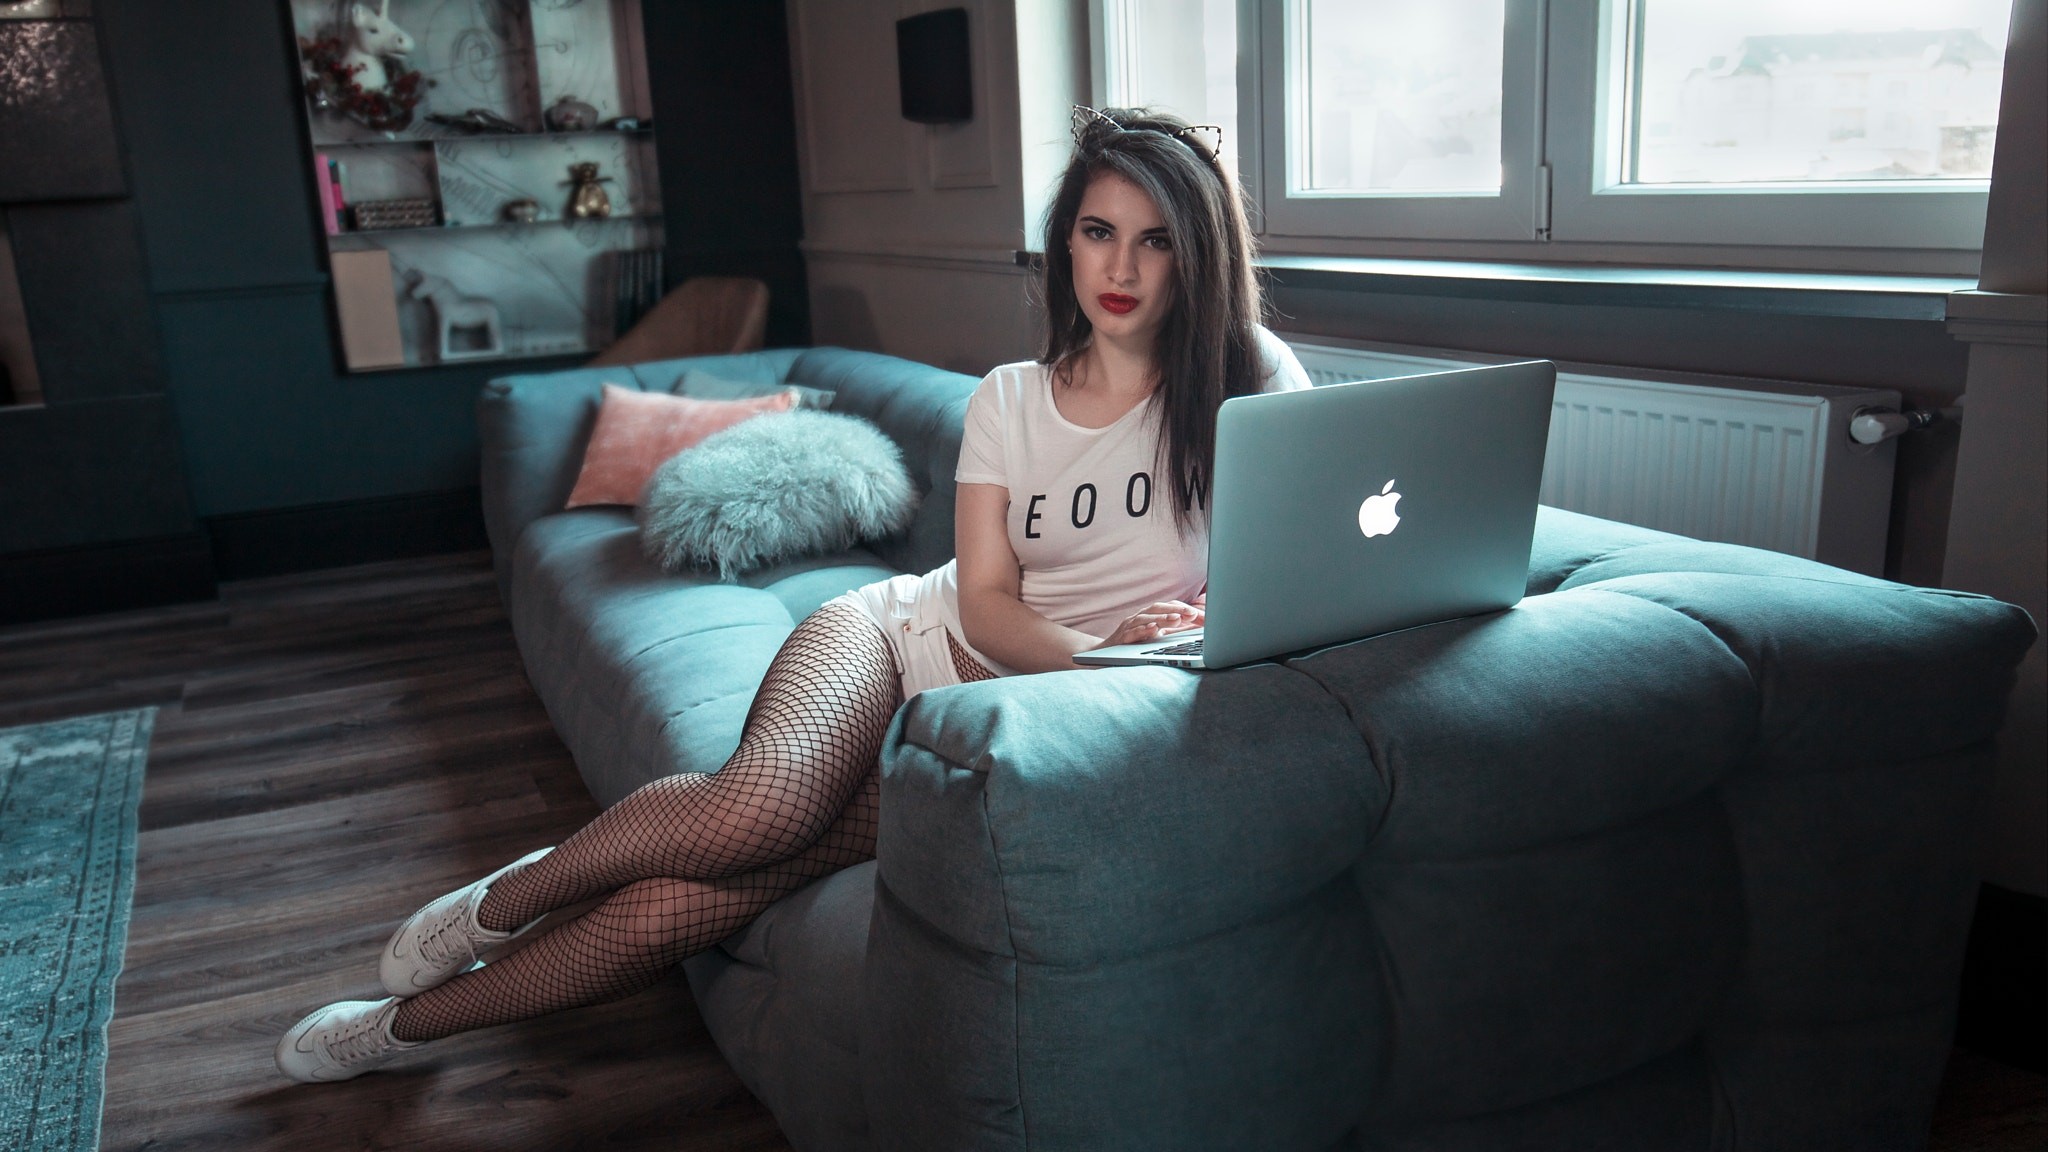 People 2048x1152 Anna Wolf women sitting sneakers fishnet stockings T-shirt laptop jean shorts red lipstick cat ears MacBook Peter Jordanoff whole body couch